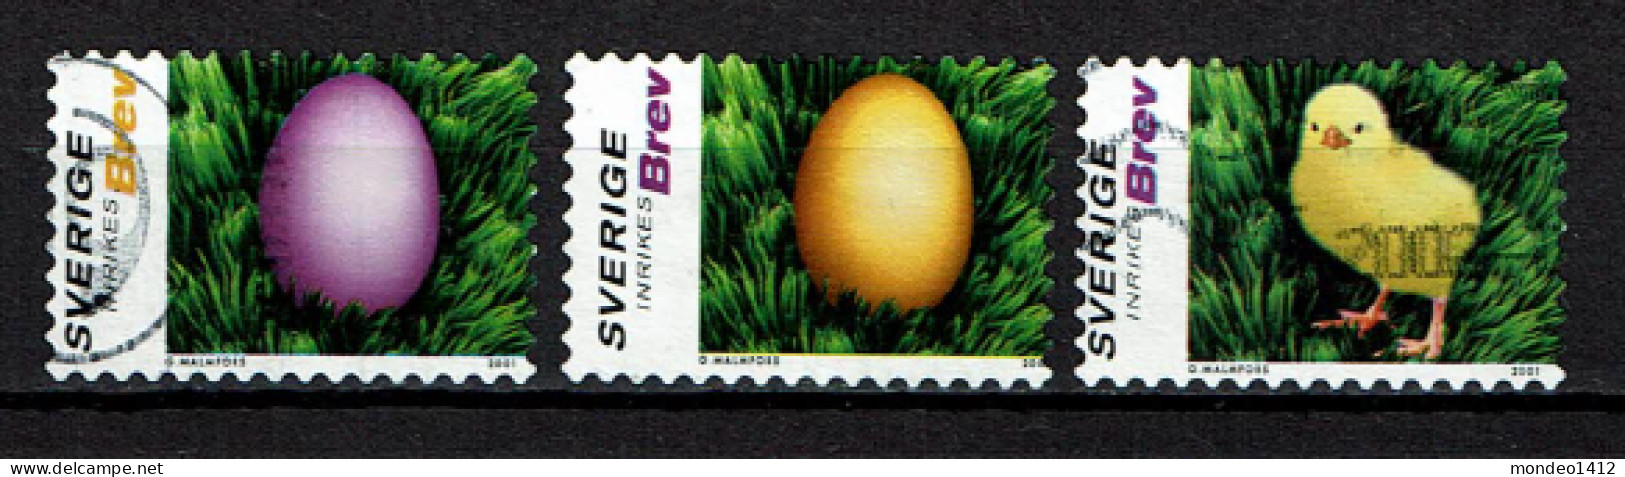 Sweden 2001 - Easter, Ostern, Pasen - Used - Used Stamps